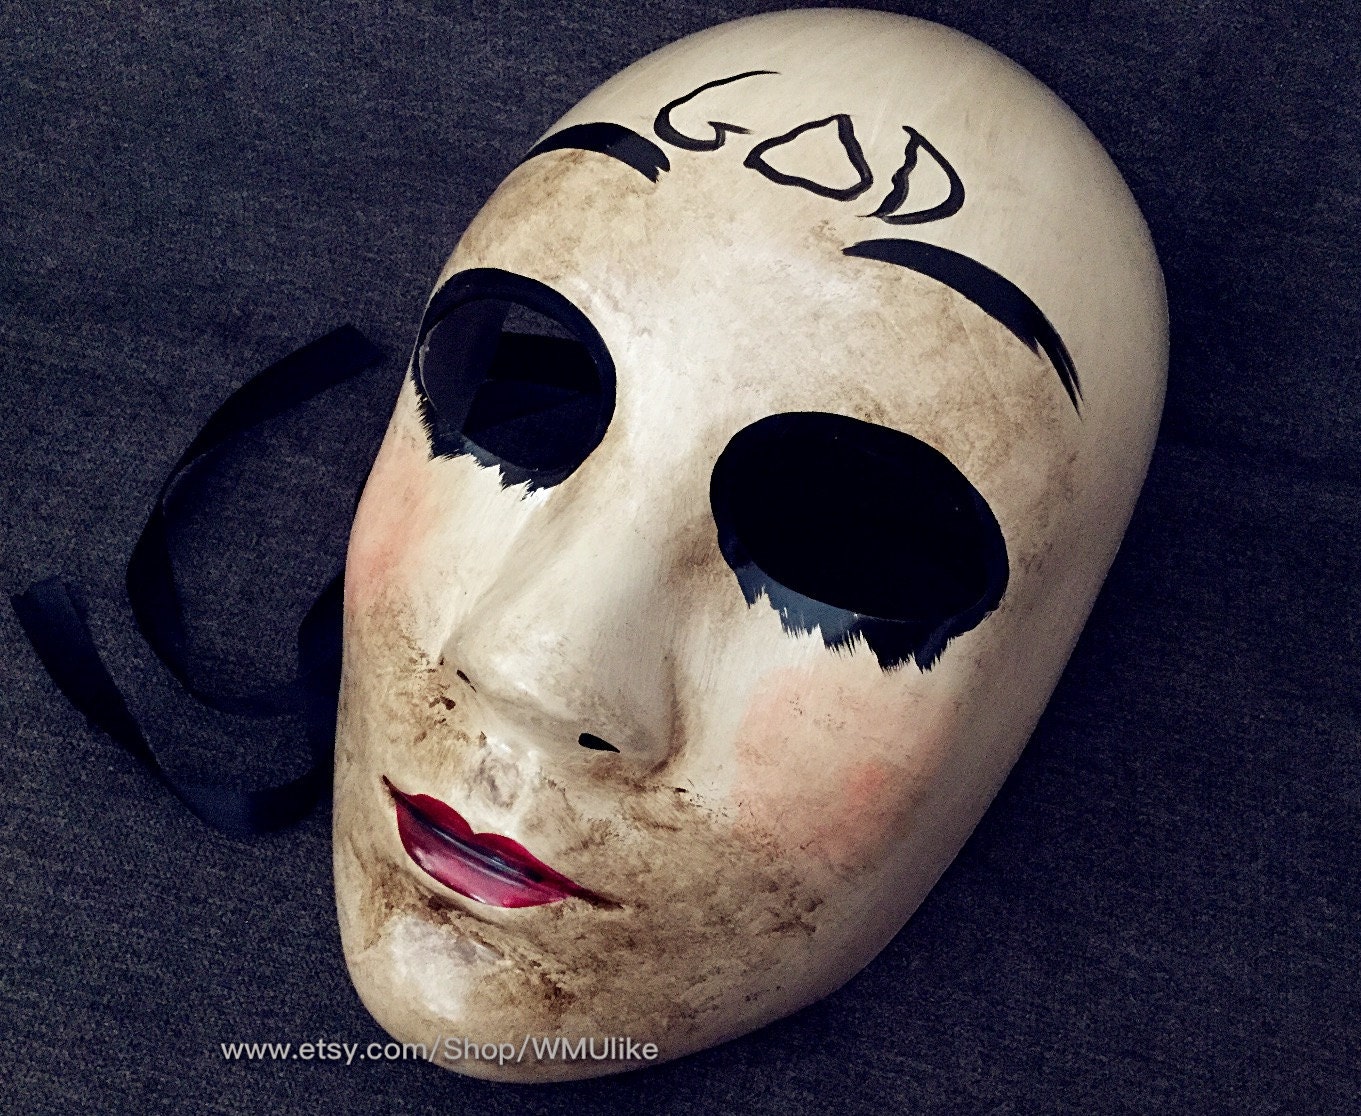 The Purge Mask Halloween Costume unisex full face Anarchy mask